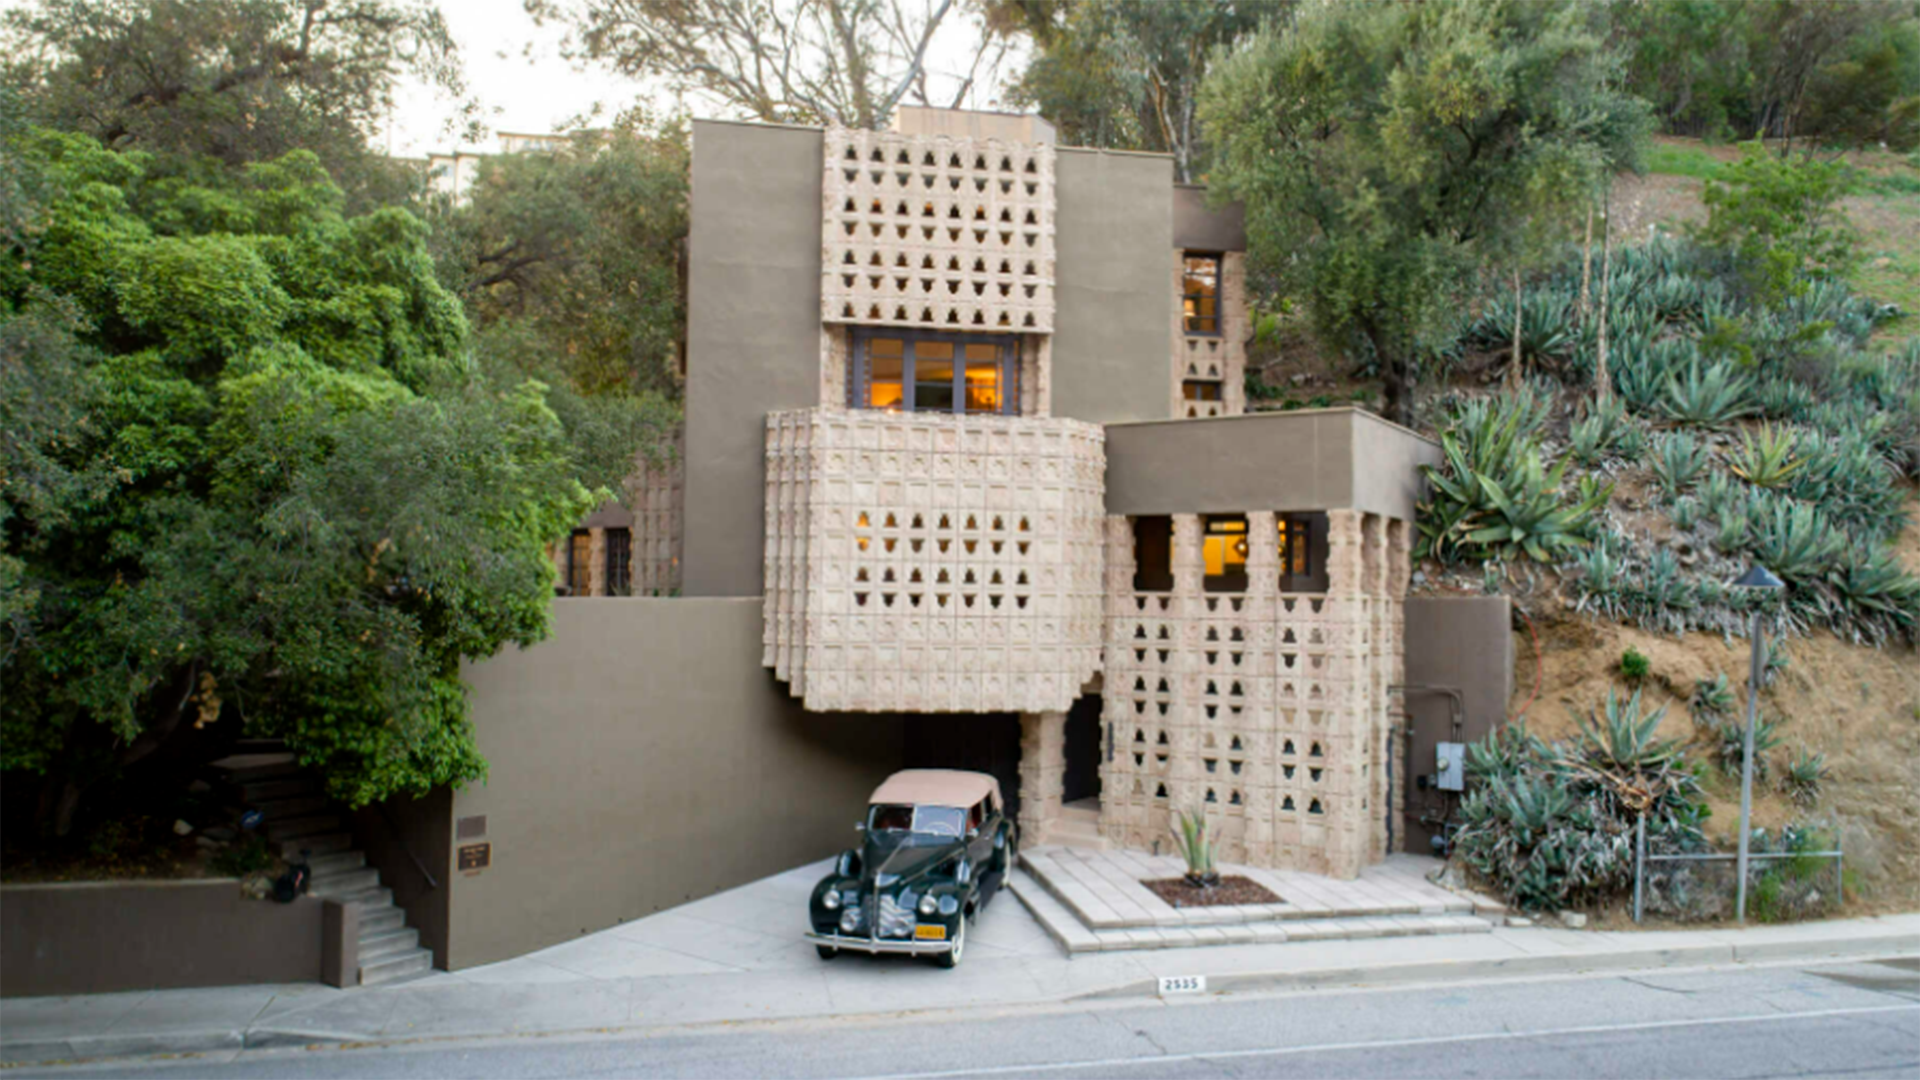 Own a piece of history with this $4.5 million geometric masterpiece